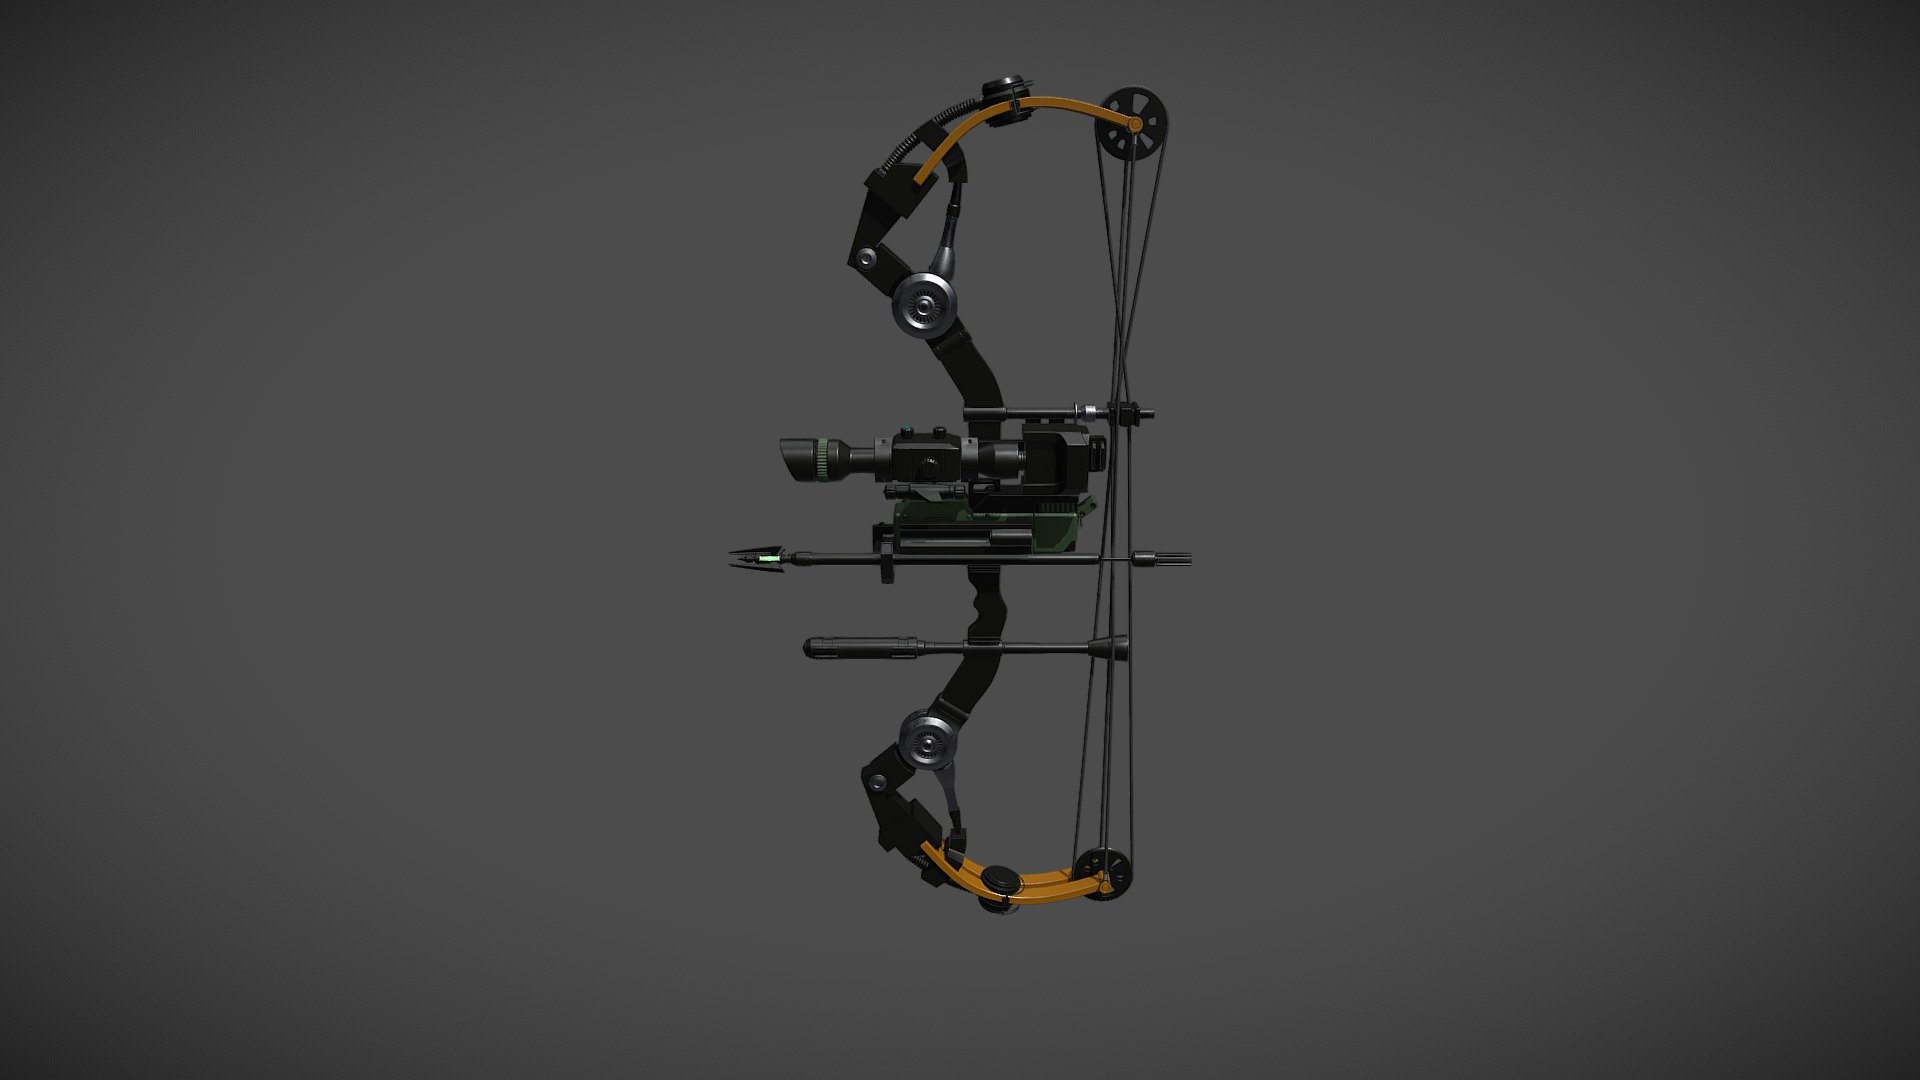 Artstation link: https://www.artstation.com/ranjanmetya

THIS IS MY Sci-Fi BOW MODEL &amp;I WAS USED
MAYA FOR MAKE THIS MODEL AND USE SUBSTANCE PAINTER FOR TEXTURING… - Sci-Fi BOW - 3D model by Ranjan Metya (@Ranjan.Metya) 3d model